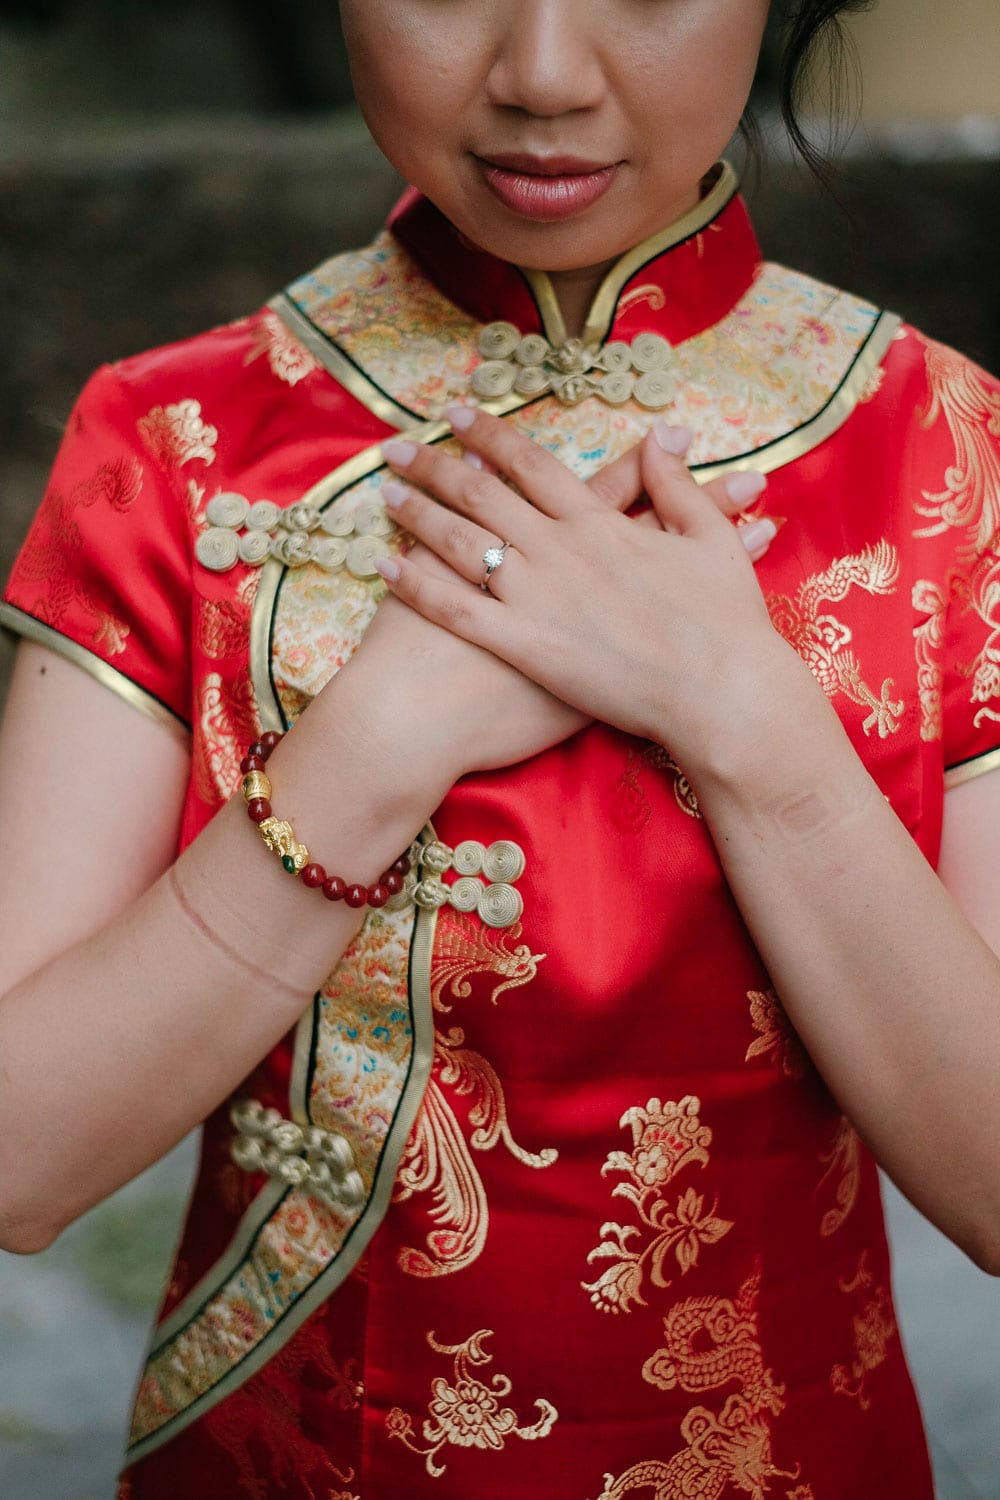 red chinese dress in gremio palace lisbon wedding #reddress #chinesewedding #gremiopalace #bohemianwedding